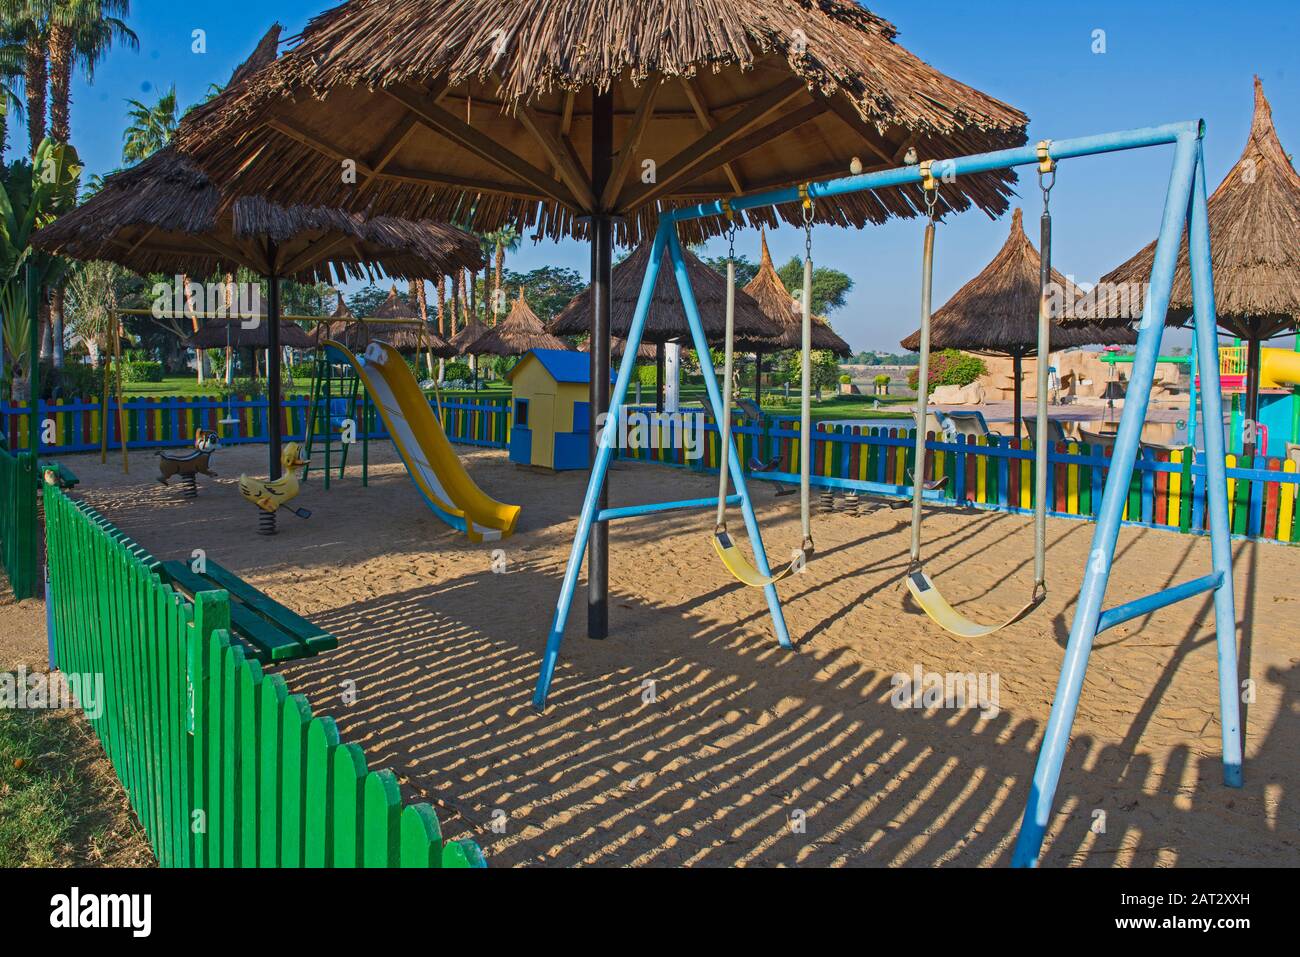 Swings frame structure in children's playground area with slide Stock Photo